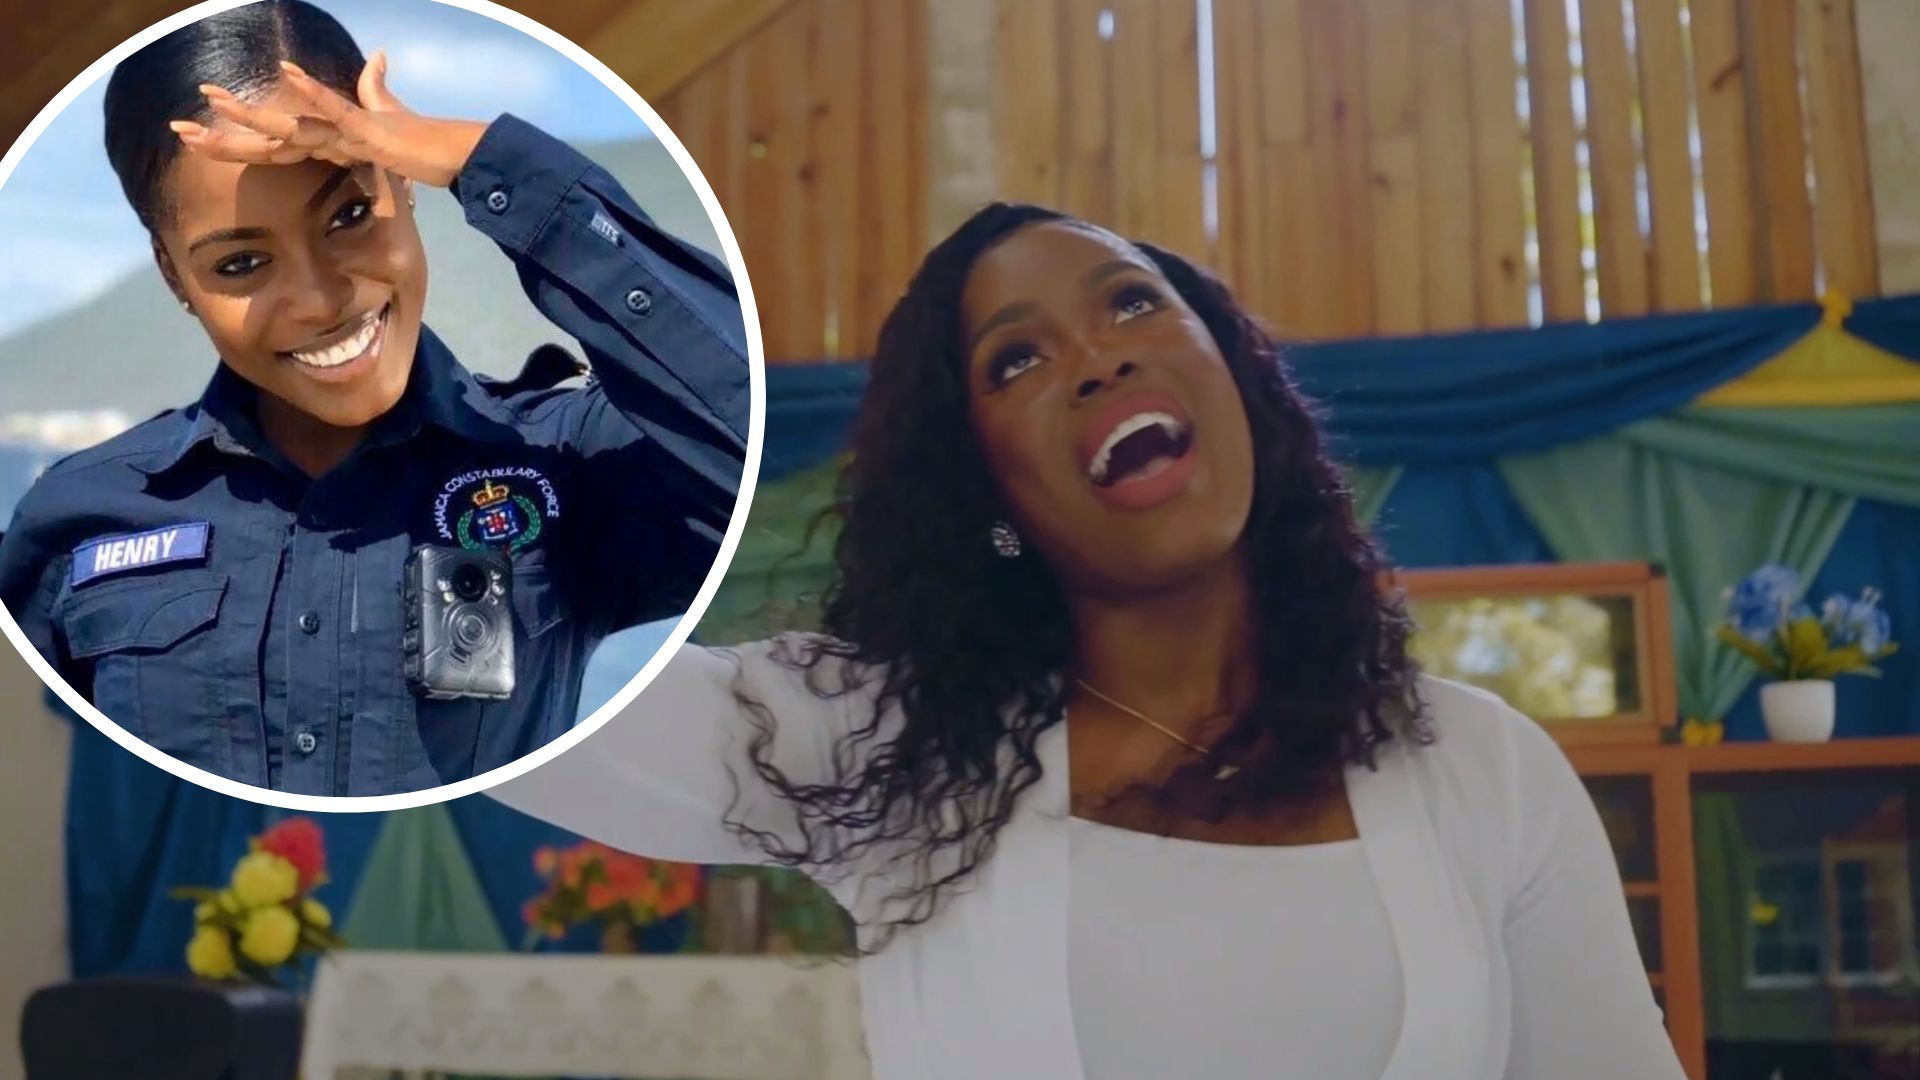 Jamaicas Queen Cop Drops First Song 22Draw Close22 With Music Video Addressing Social Problems